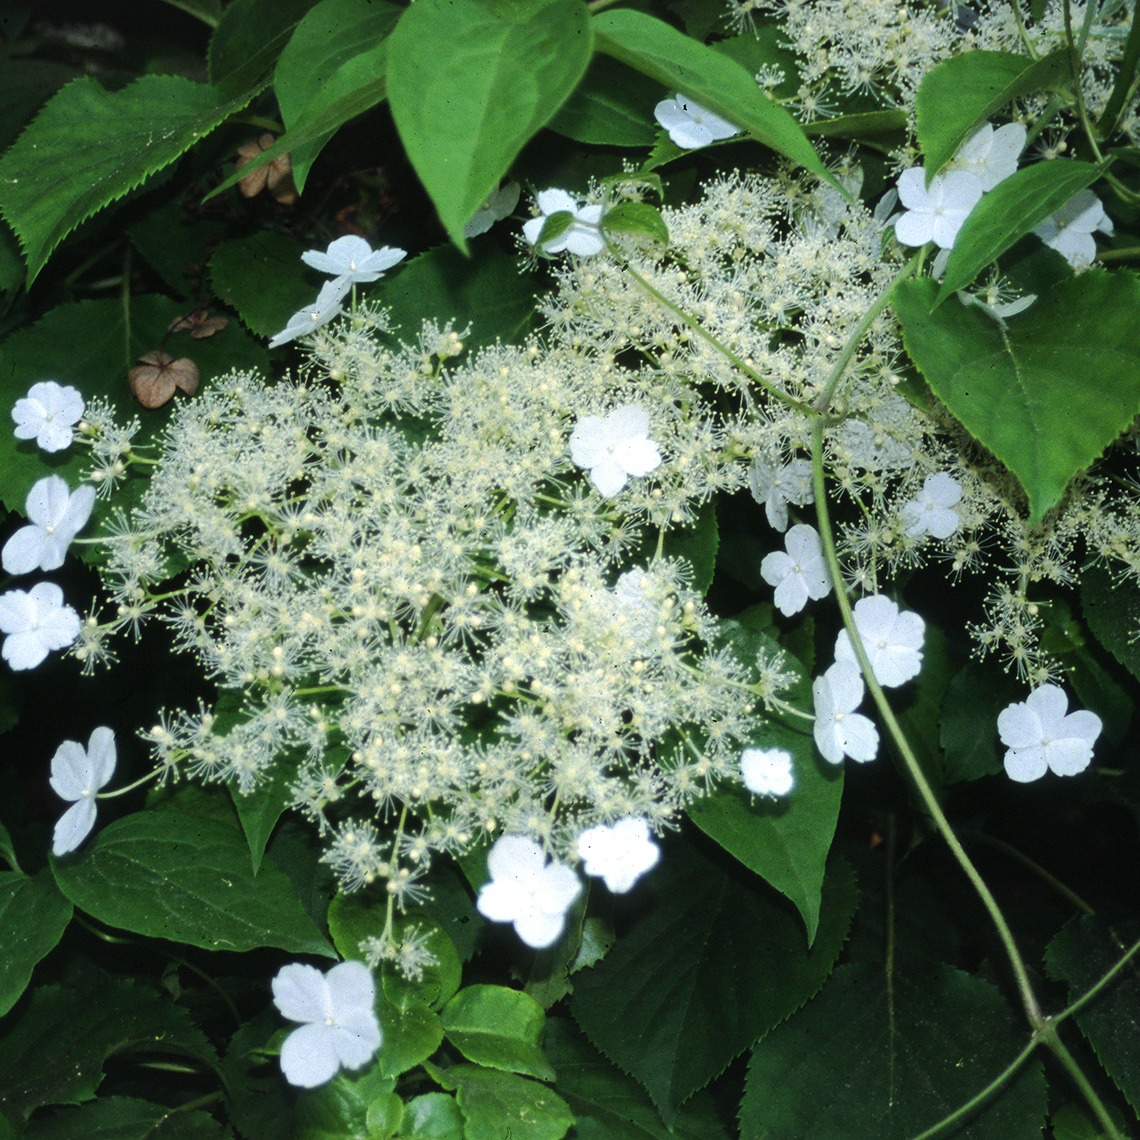 Closeup of the unusually large lacecap flowers of Skyland Giant climbing hydrangea